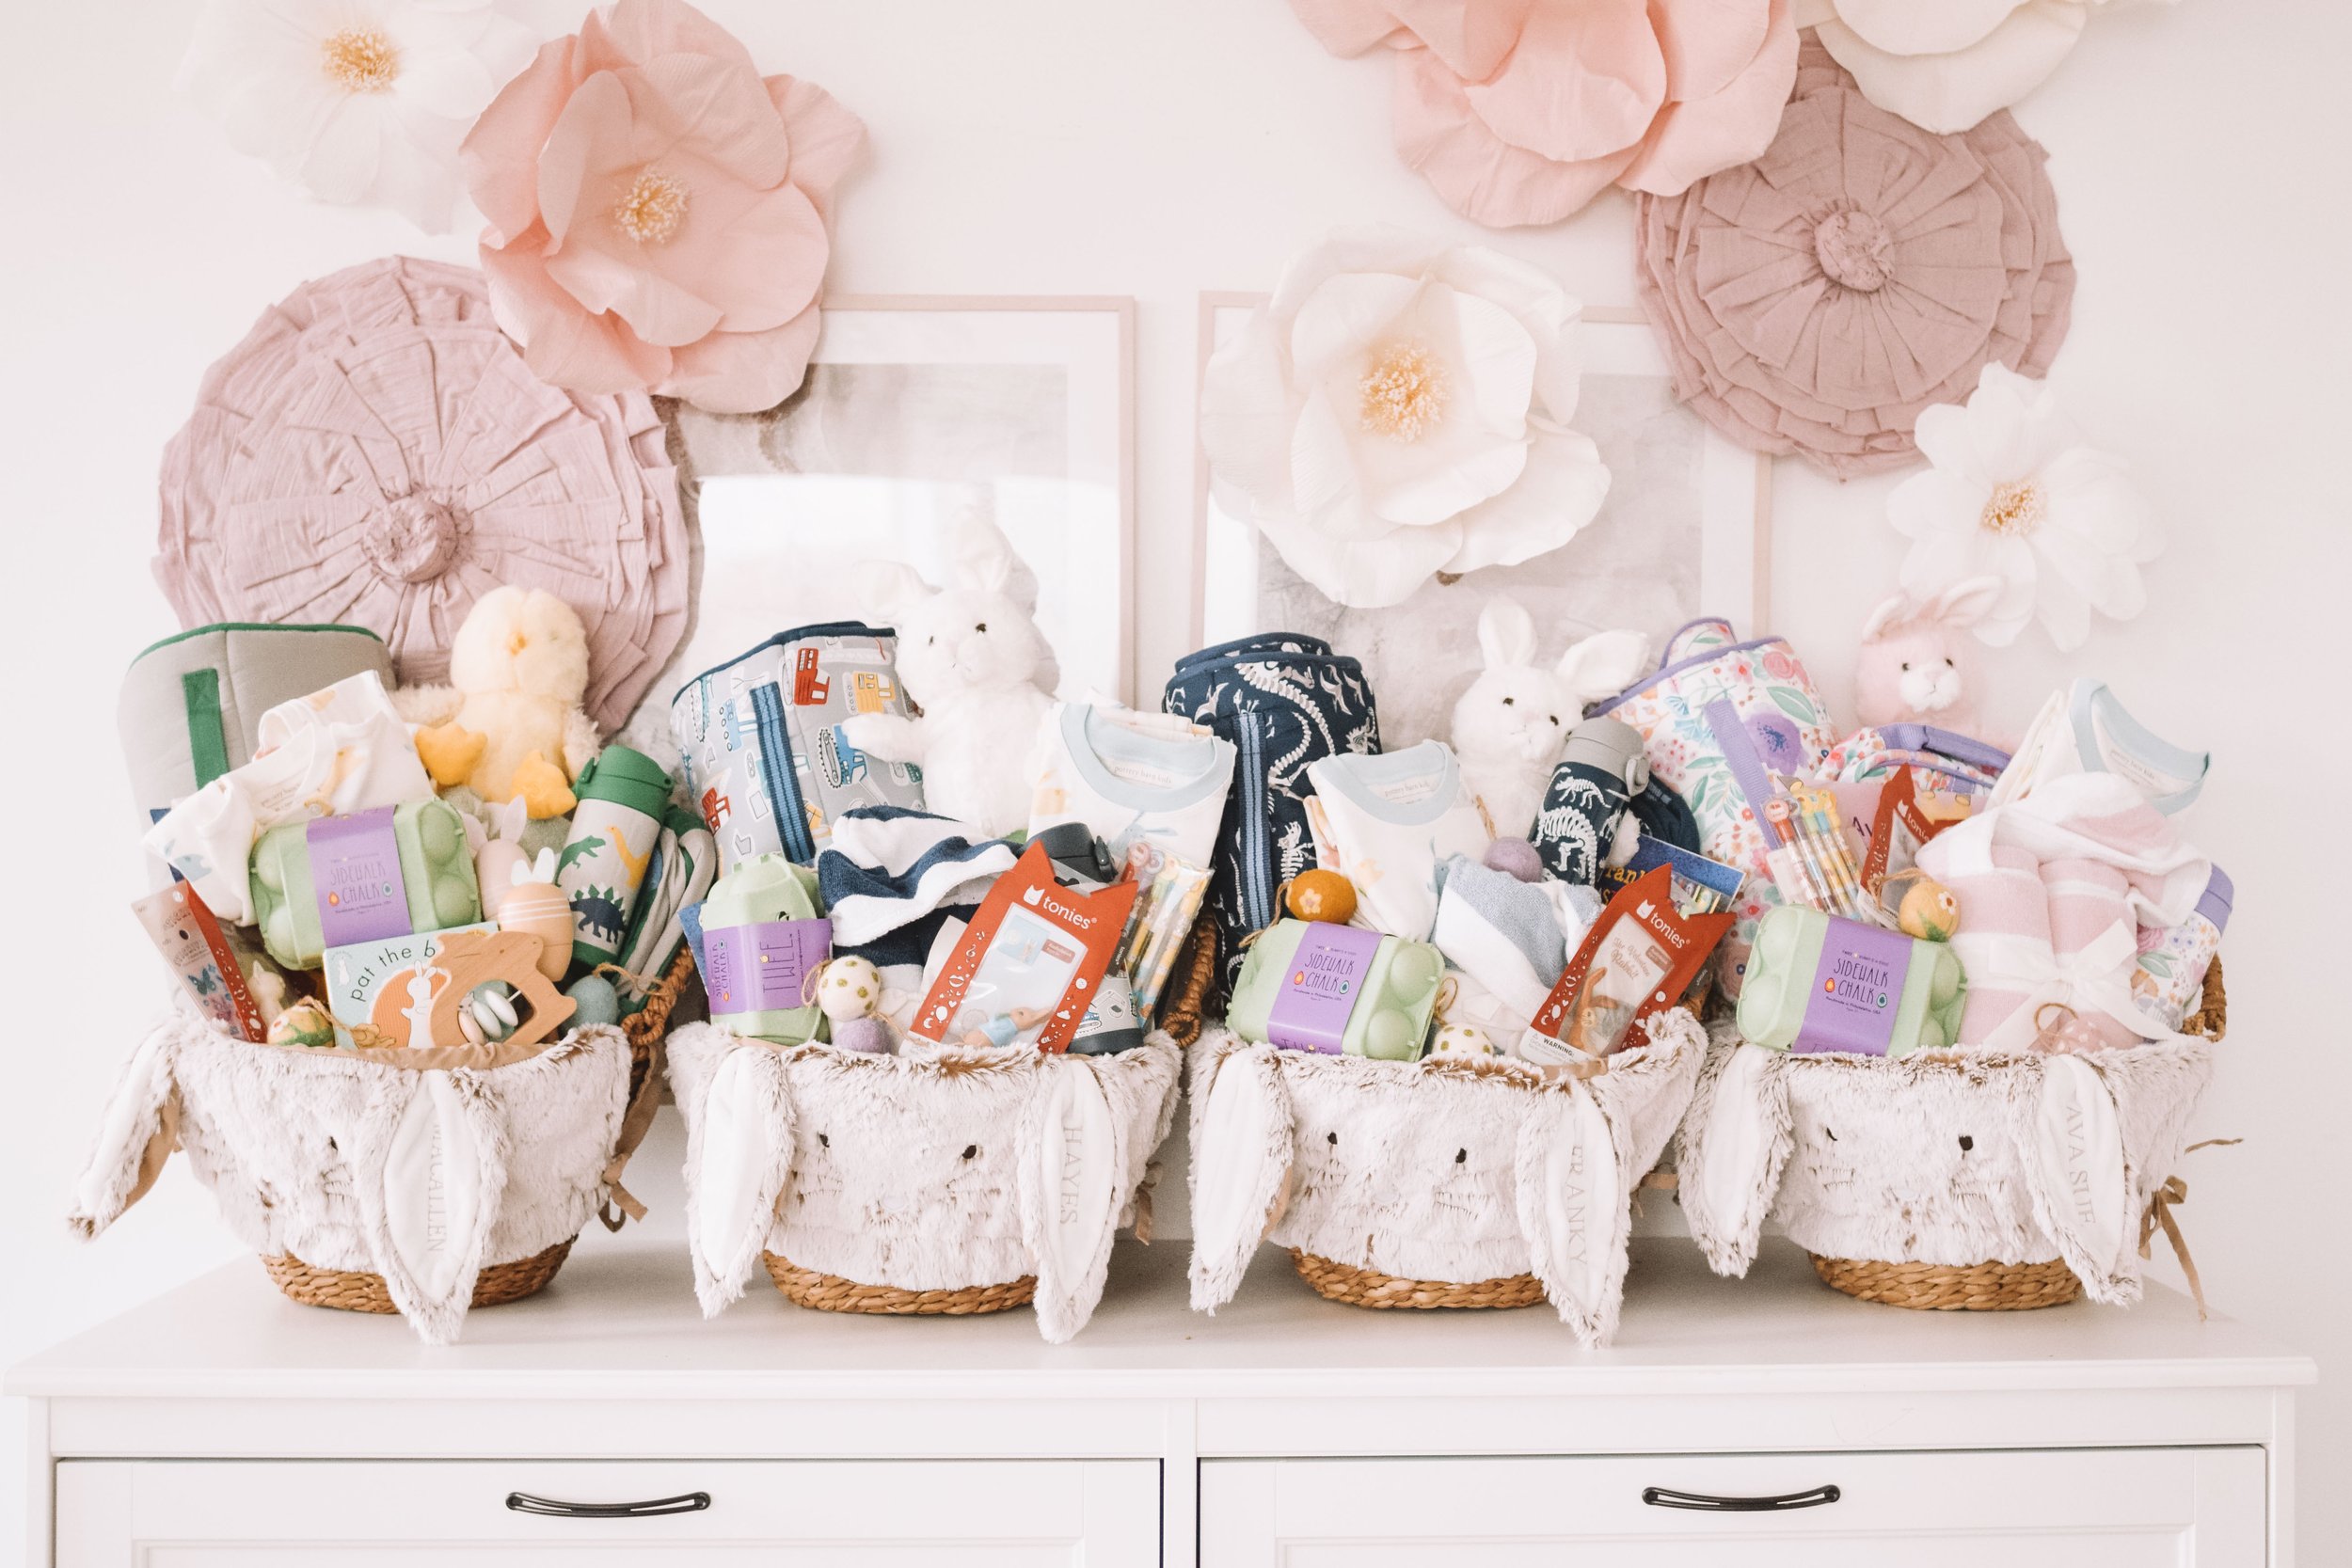 Easter basket ideas that aren't candy!